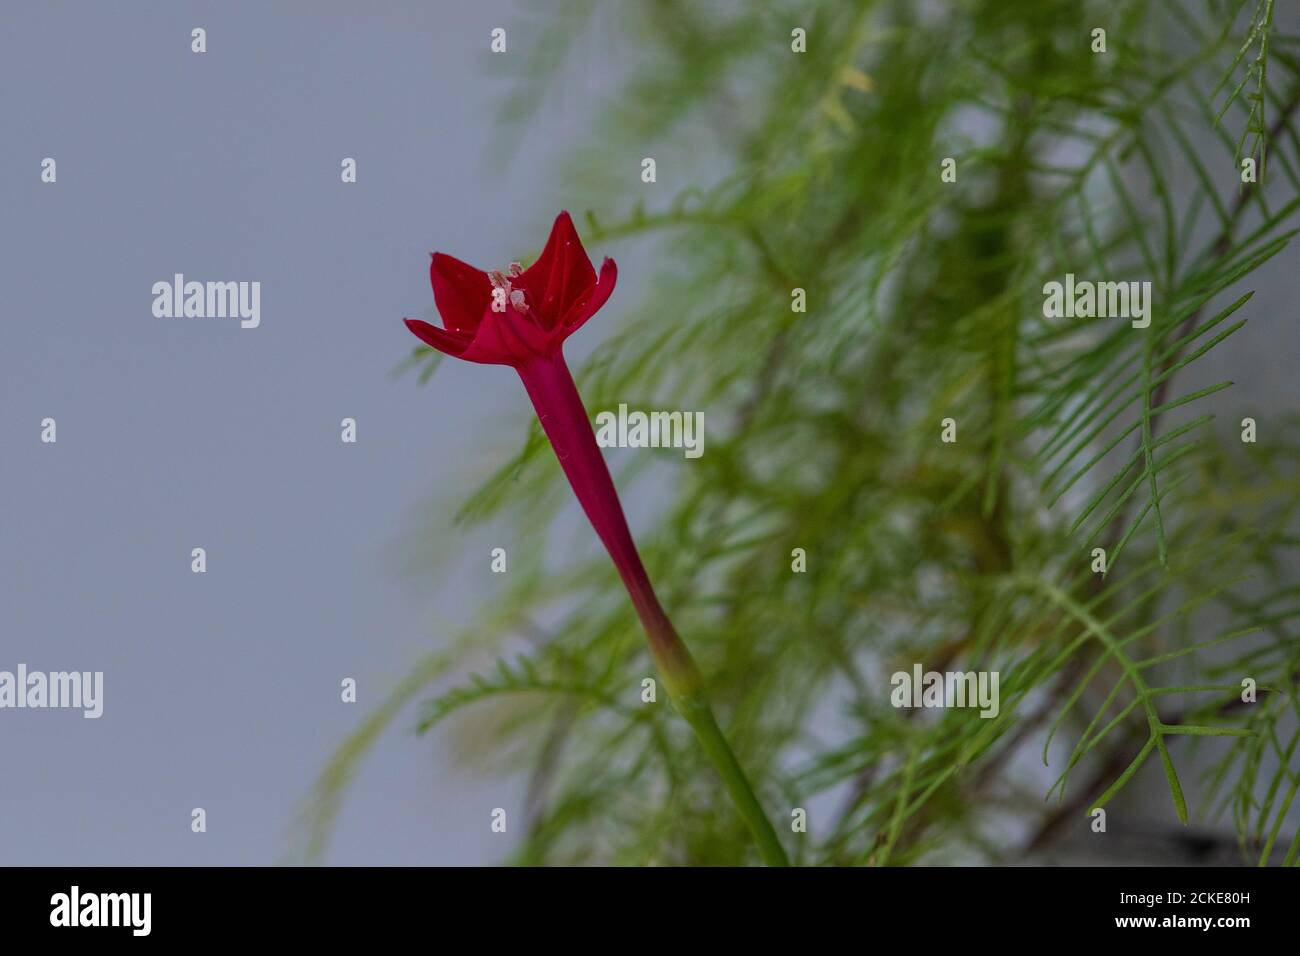 Close-up Image of a Cypress vine flower. The flower is known as Cypressvine morning glory or Cardinal Creeper or Cardinal Climber, Hummingbird Vine. Stock Photo